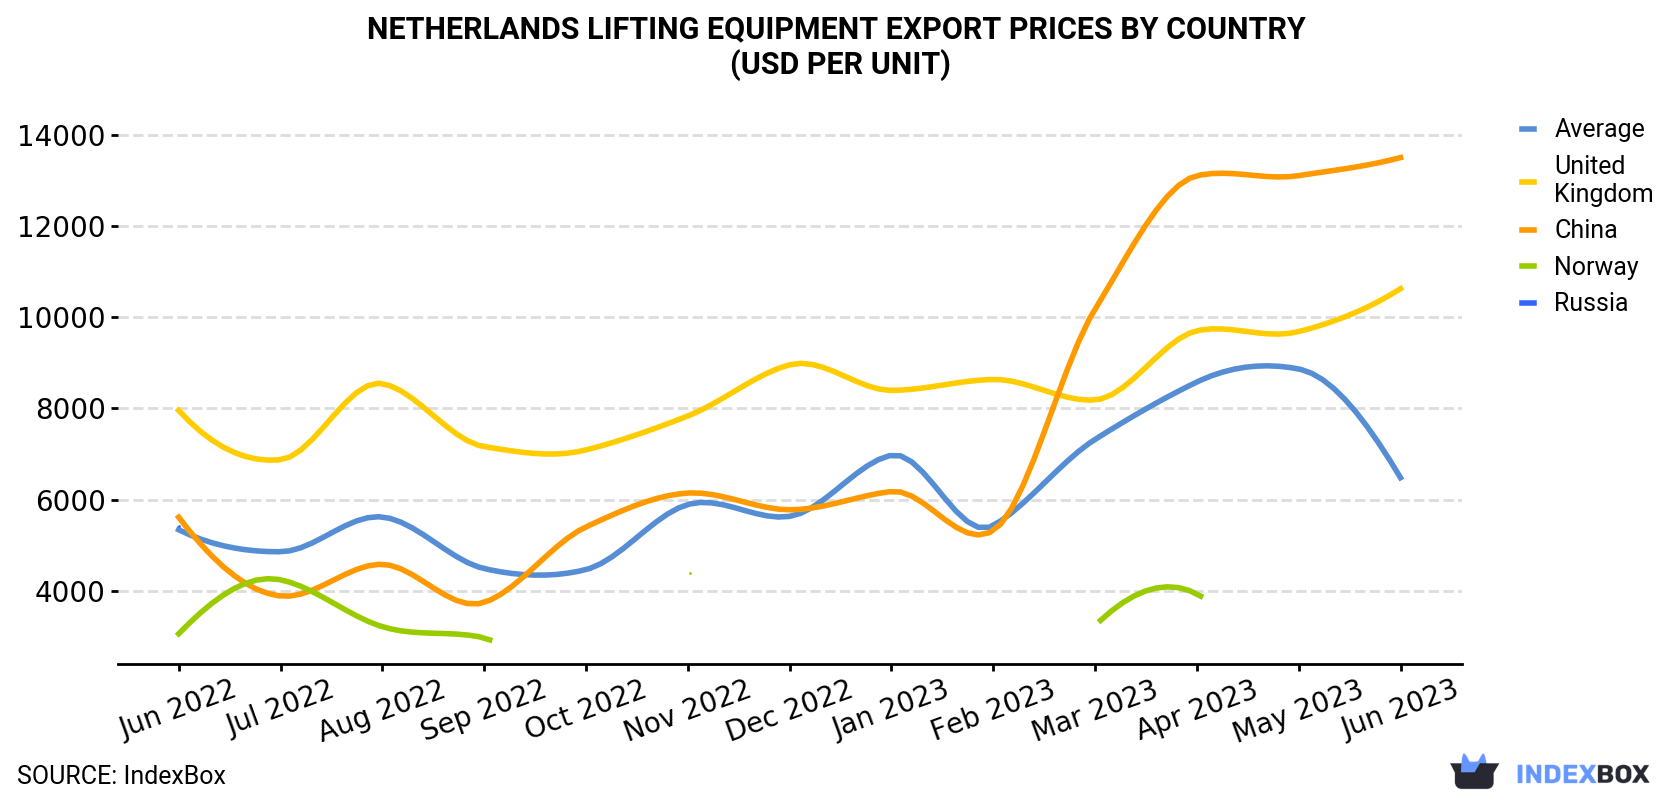 Netherlands Lifting Equipment Export Prices By Country (USD Per Unit)